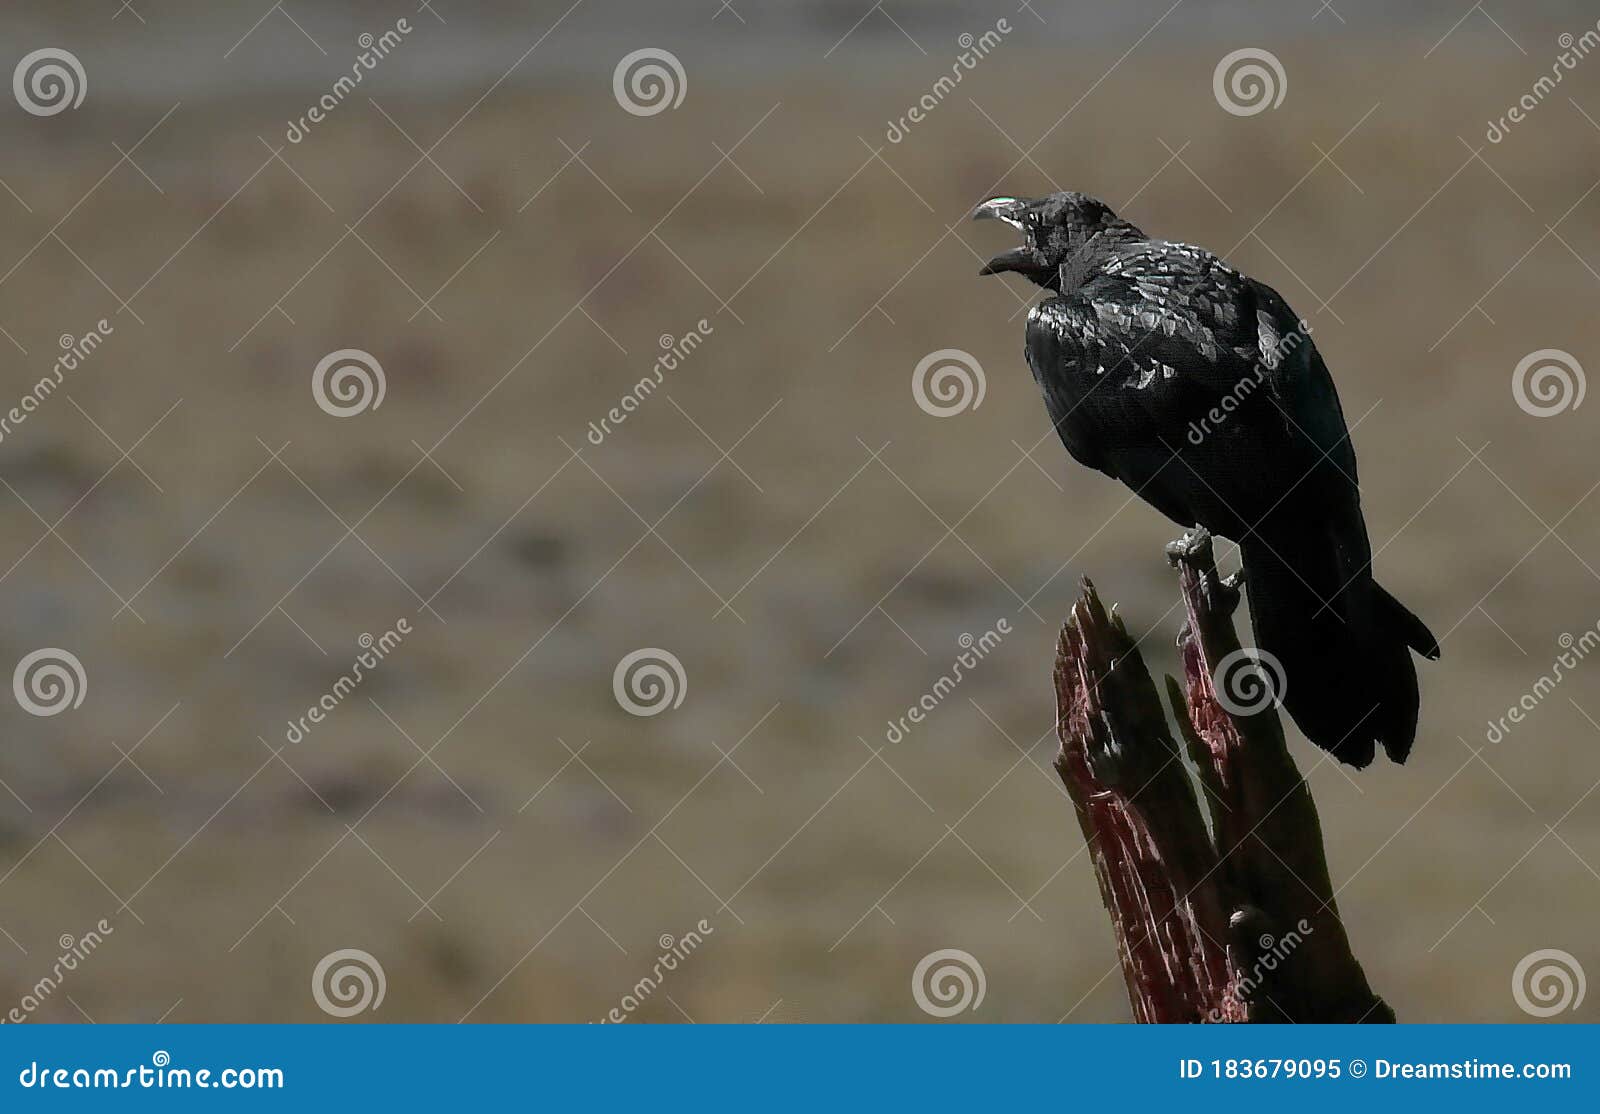 The Black Crow is a Bird Known for Its Intelligence and Adaptability, As  Well As Its Loud, Harsh Sound. Stock Image - Image of impact, wildlife:  183679095